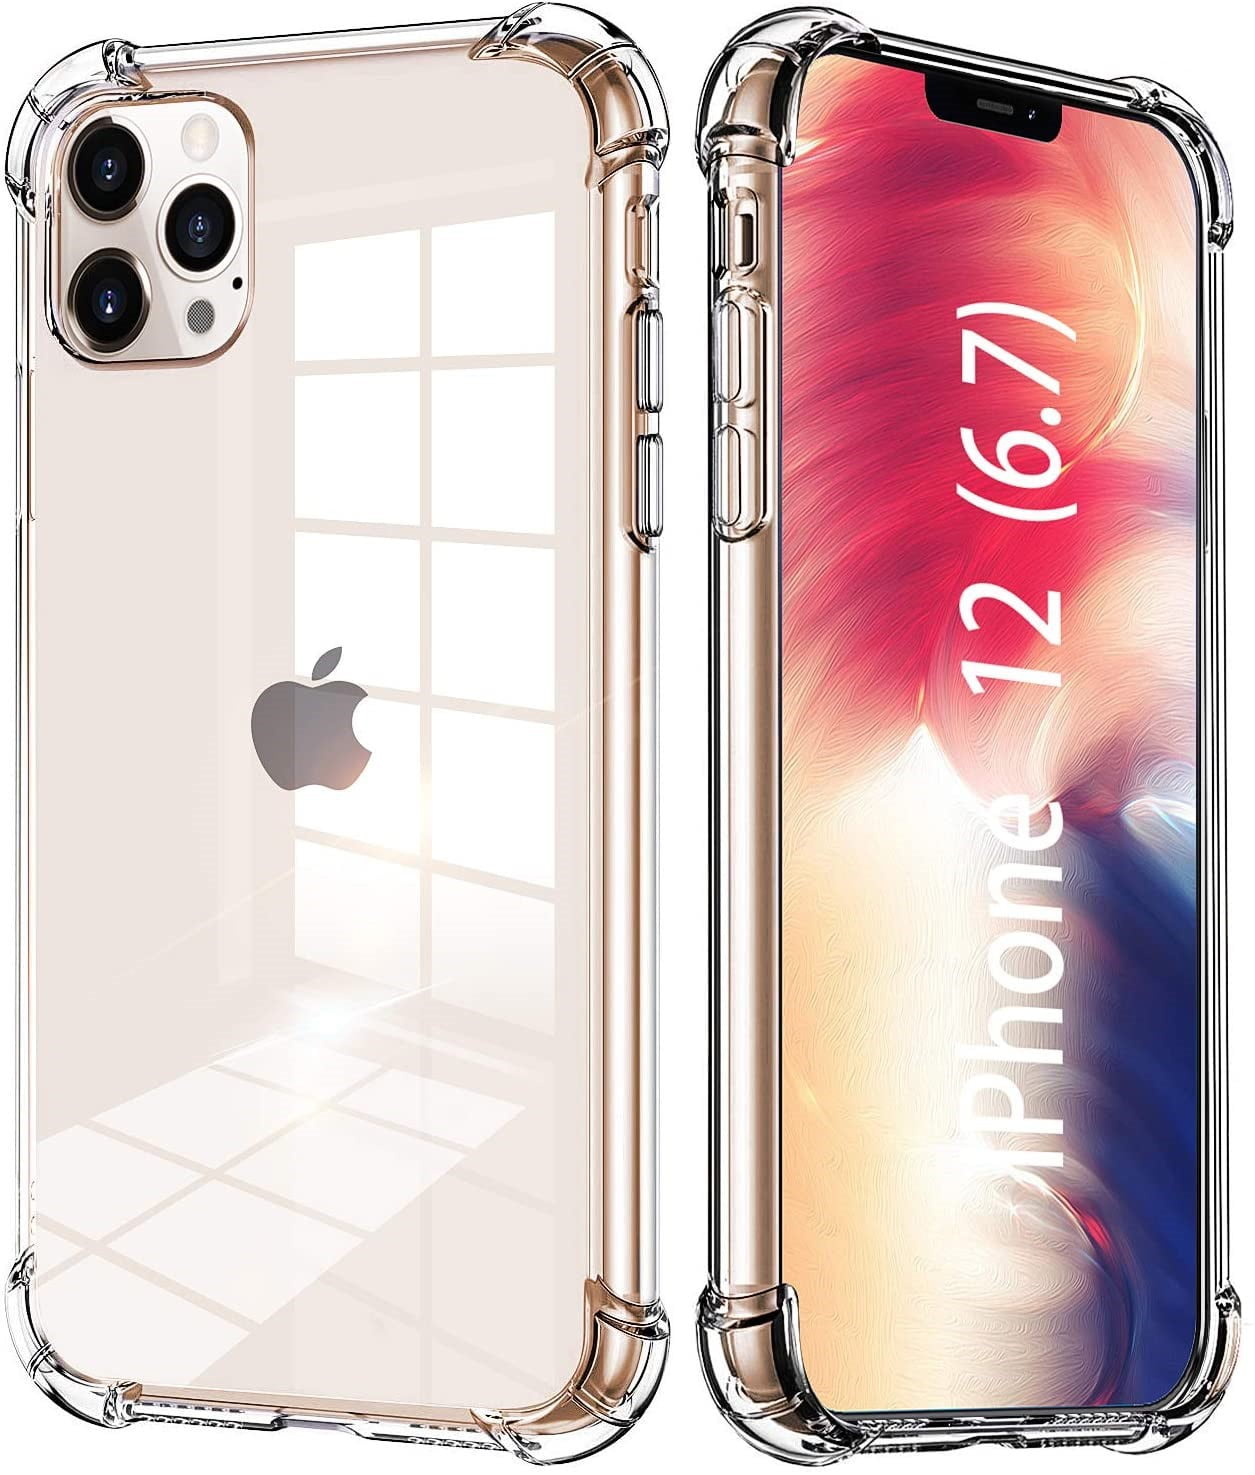 KALMORE Compatible with iPhone 12 Pro Max Case Clear Slim Fit Thin Soft Cover with Premium Flexible Bumper Protective Phone Cases for iPhone 12 Pro Max (6.7